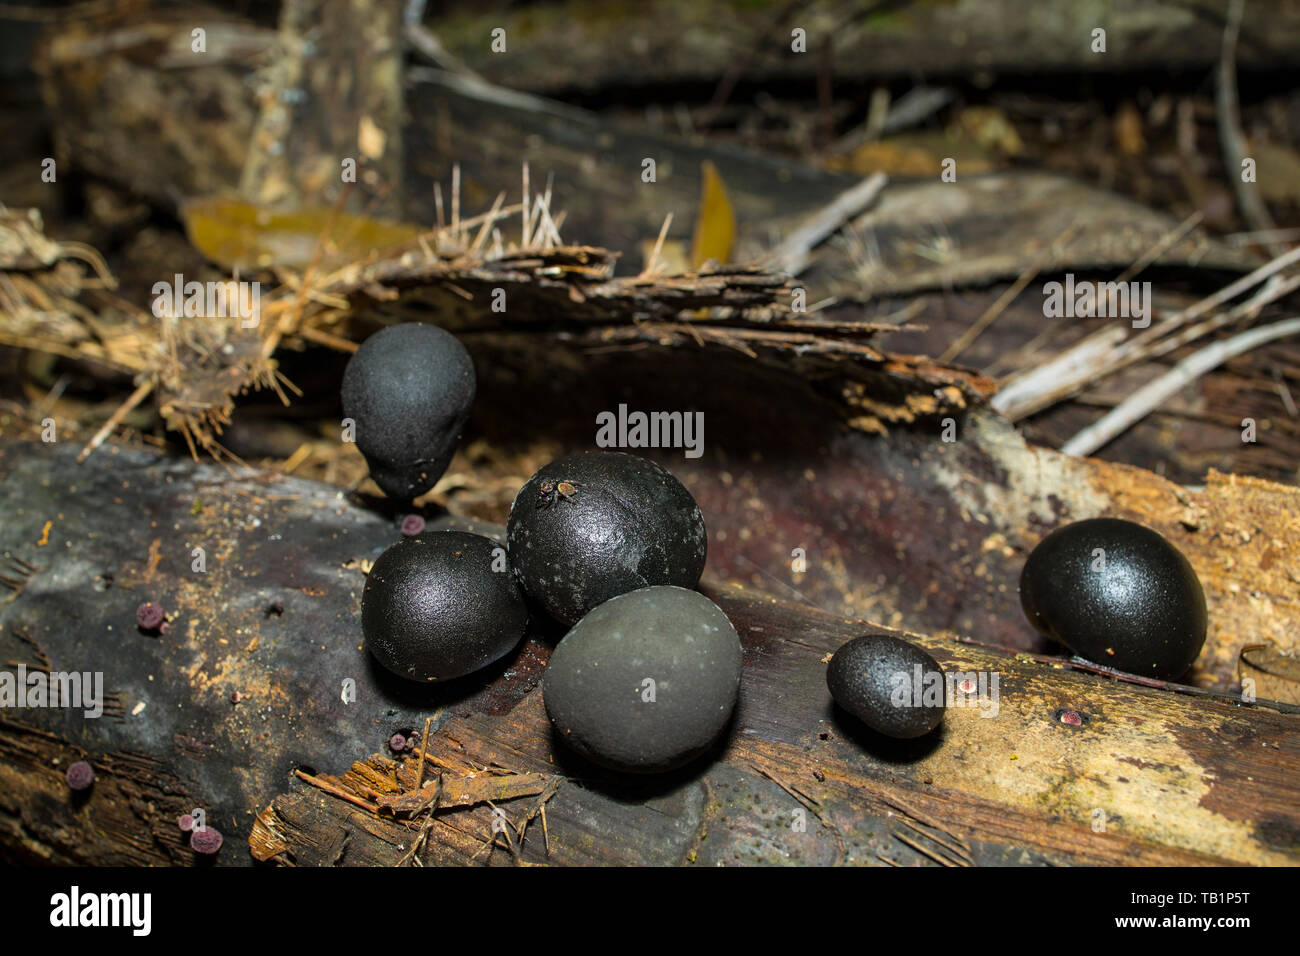 Black round mushrooms growing on a dead tree trunk inside a Malaysian tropical rainforest Stock Photo